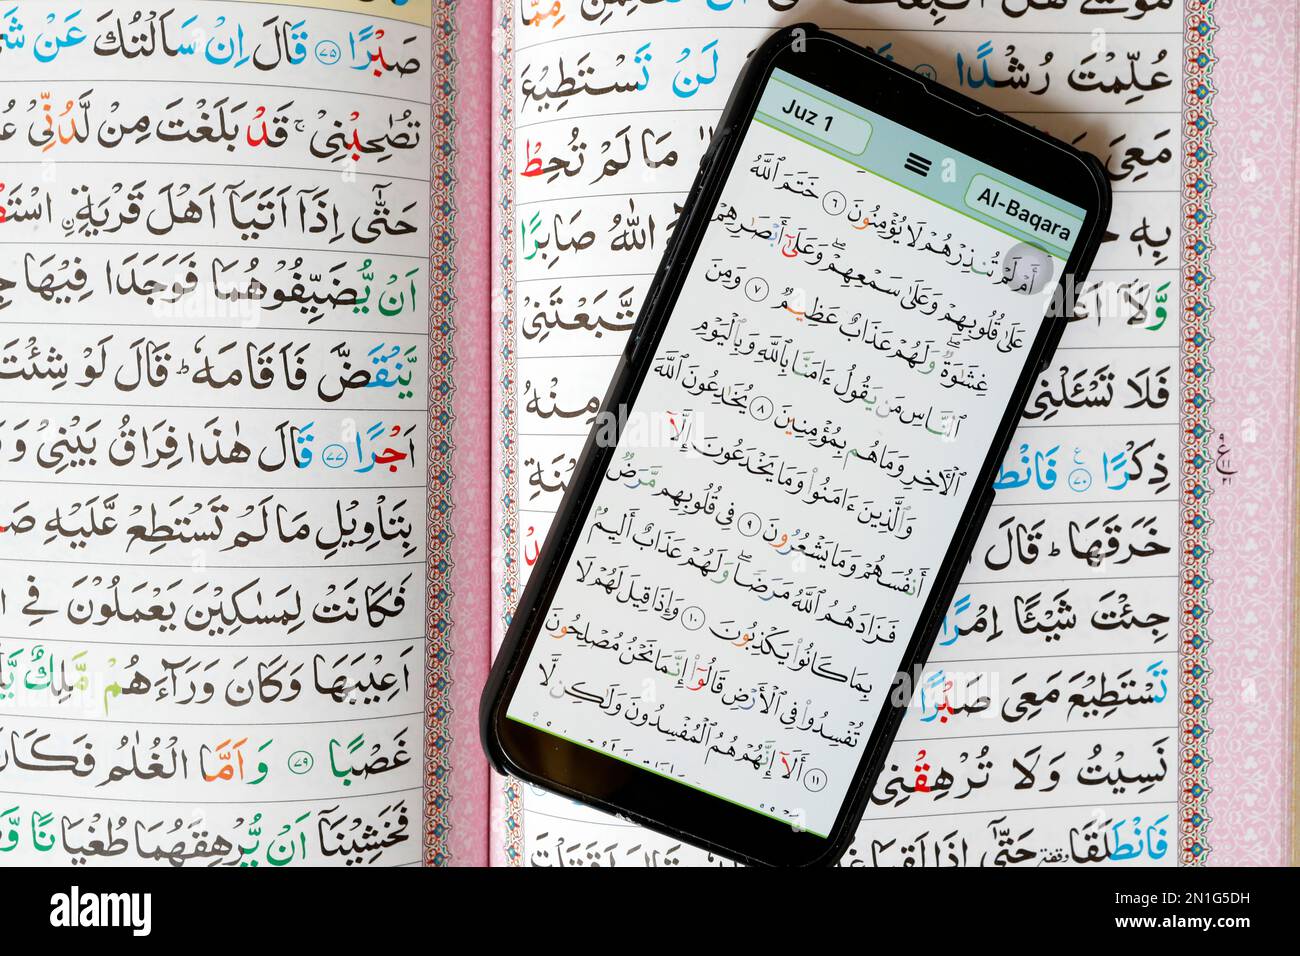 Digital Quran on smartphone and traditional paper Holy Quran, paper and digital Quran, Al-Serkal Mosque, Cambodia, Indochina, Southeast Asia, Asia Stock Photo